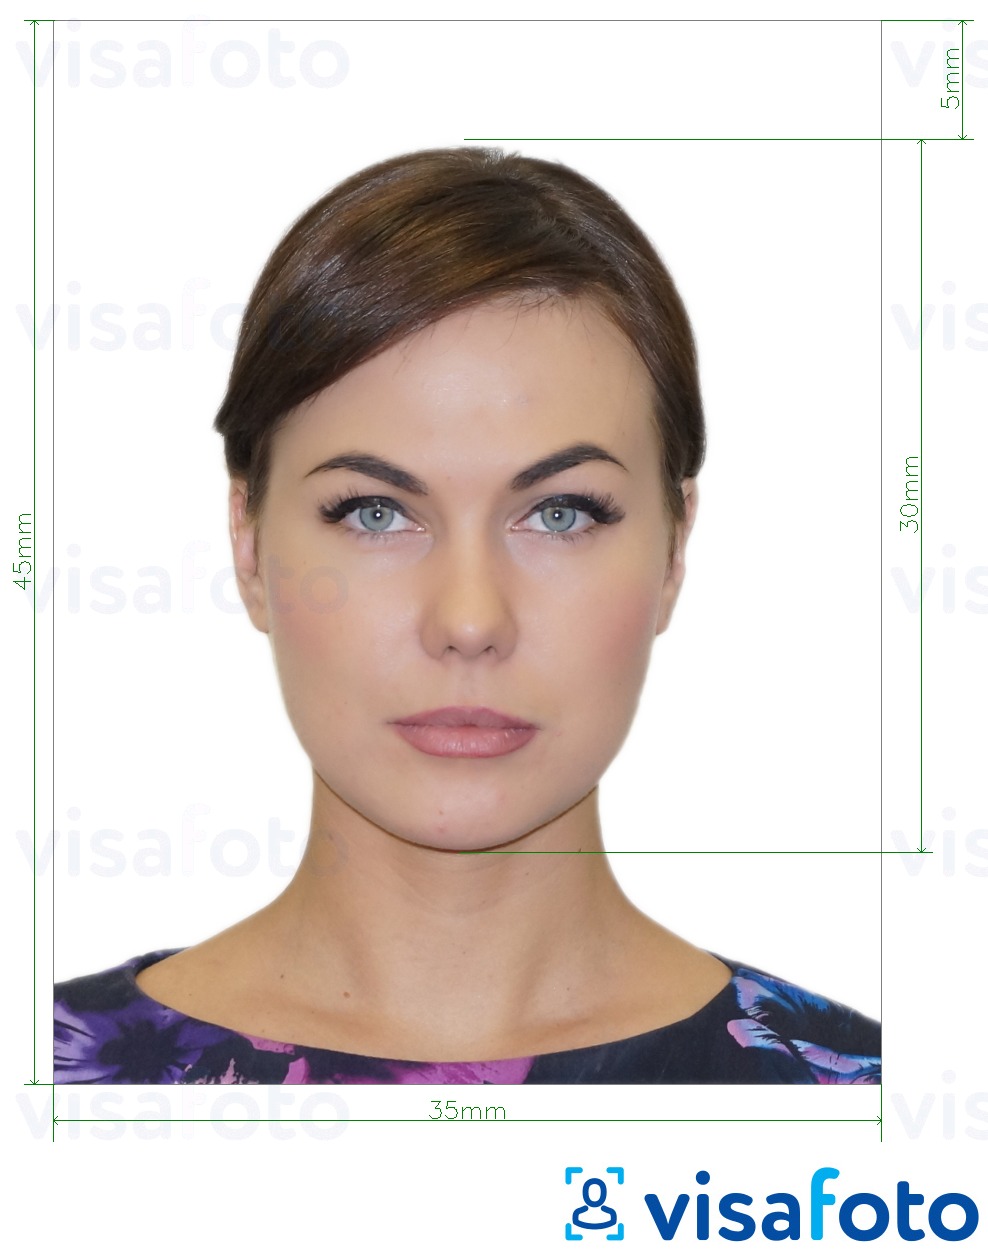 Example of photo for Russia visa via VFSGlobal 35x45 mm with exact size specification